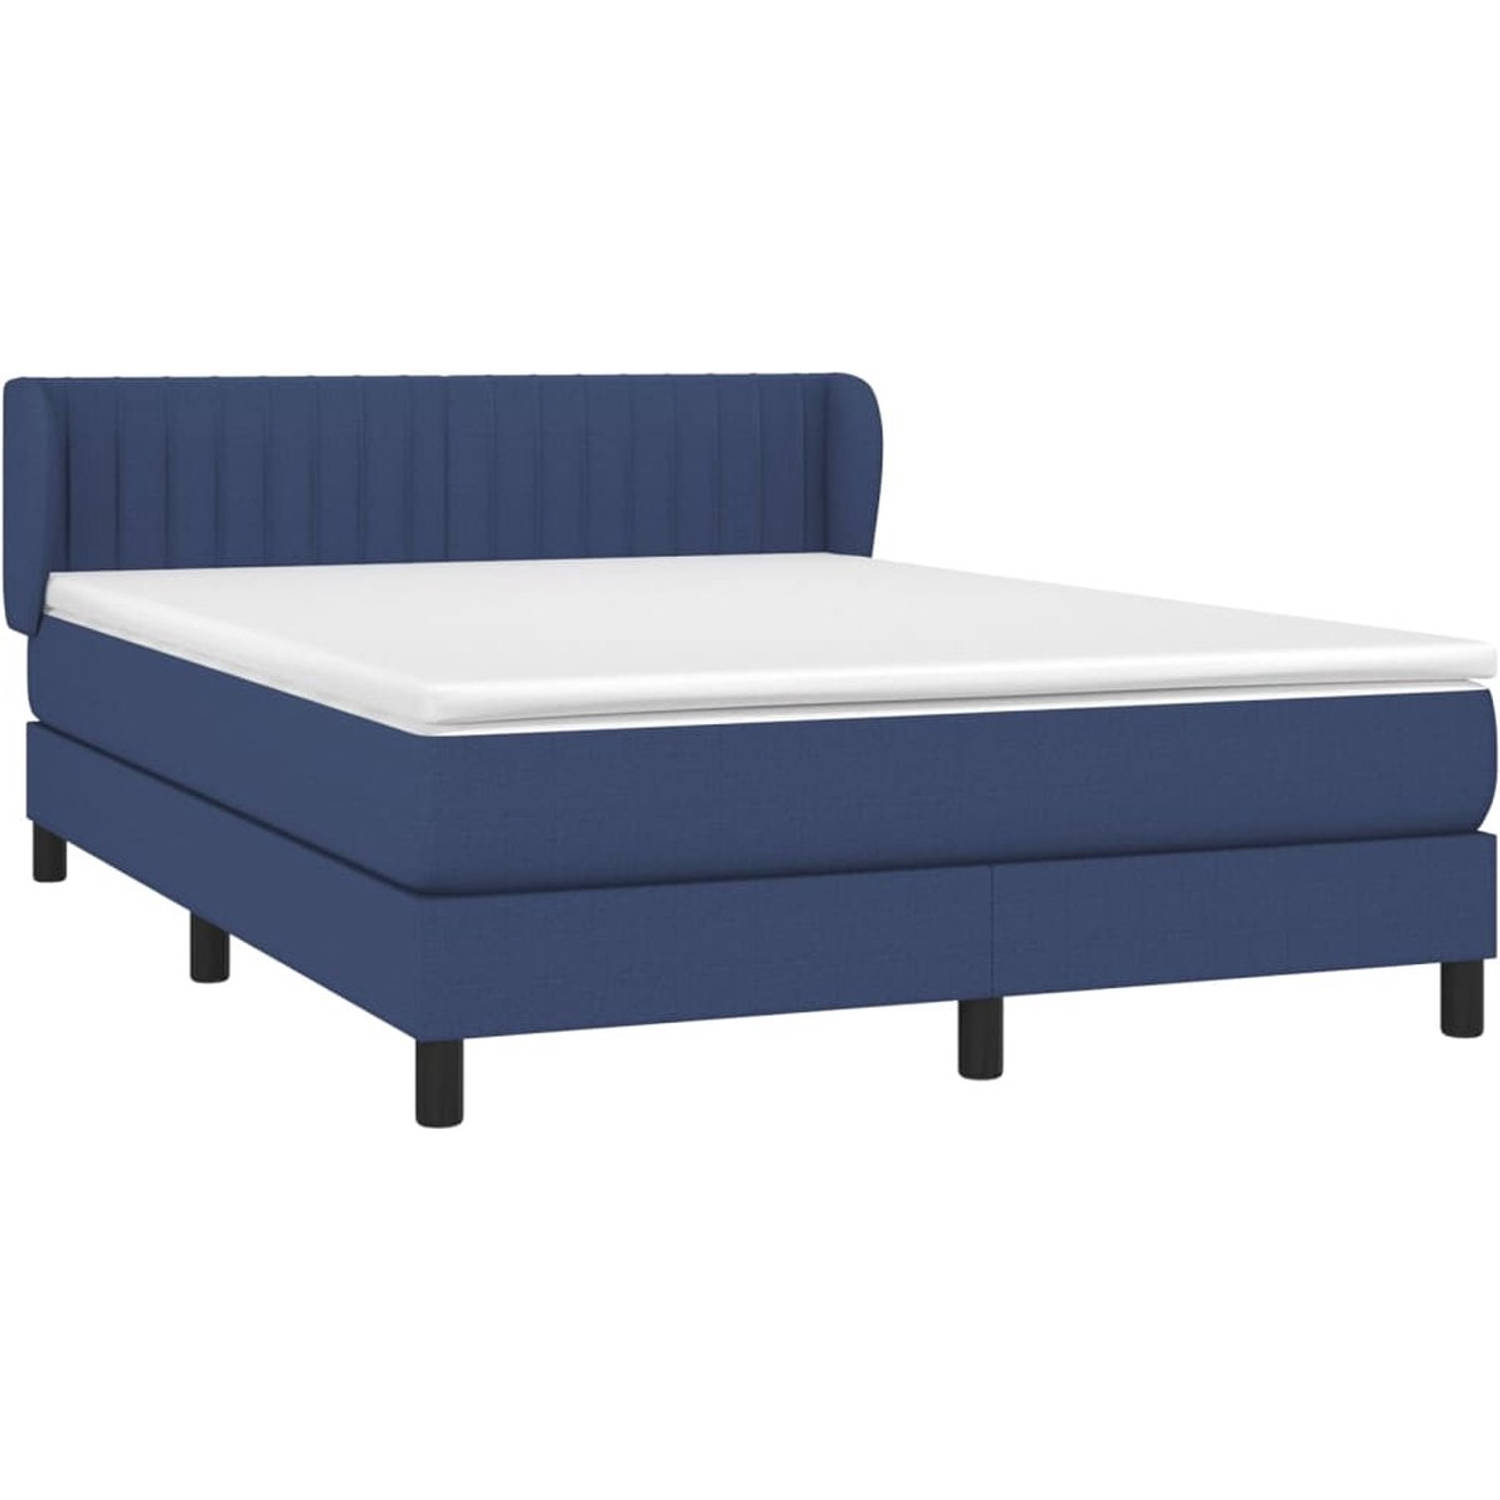 The Living Store Bed - The Living Store Blauw Stoffen Boxspringbed - 193x147x78/88 cm - Pocketvering matras - Middelharde ondersteuning